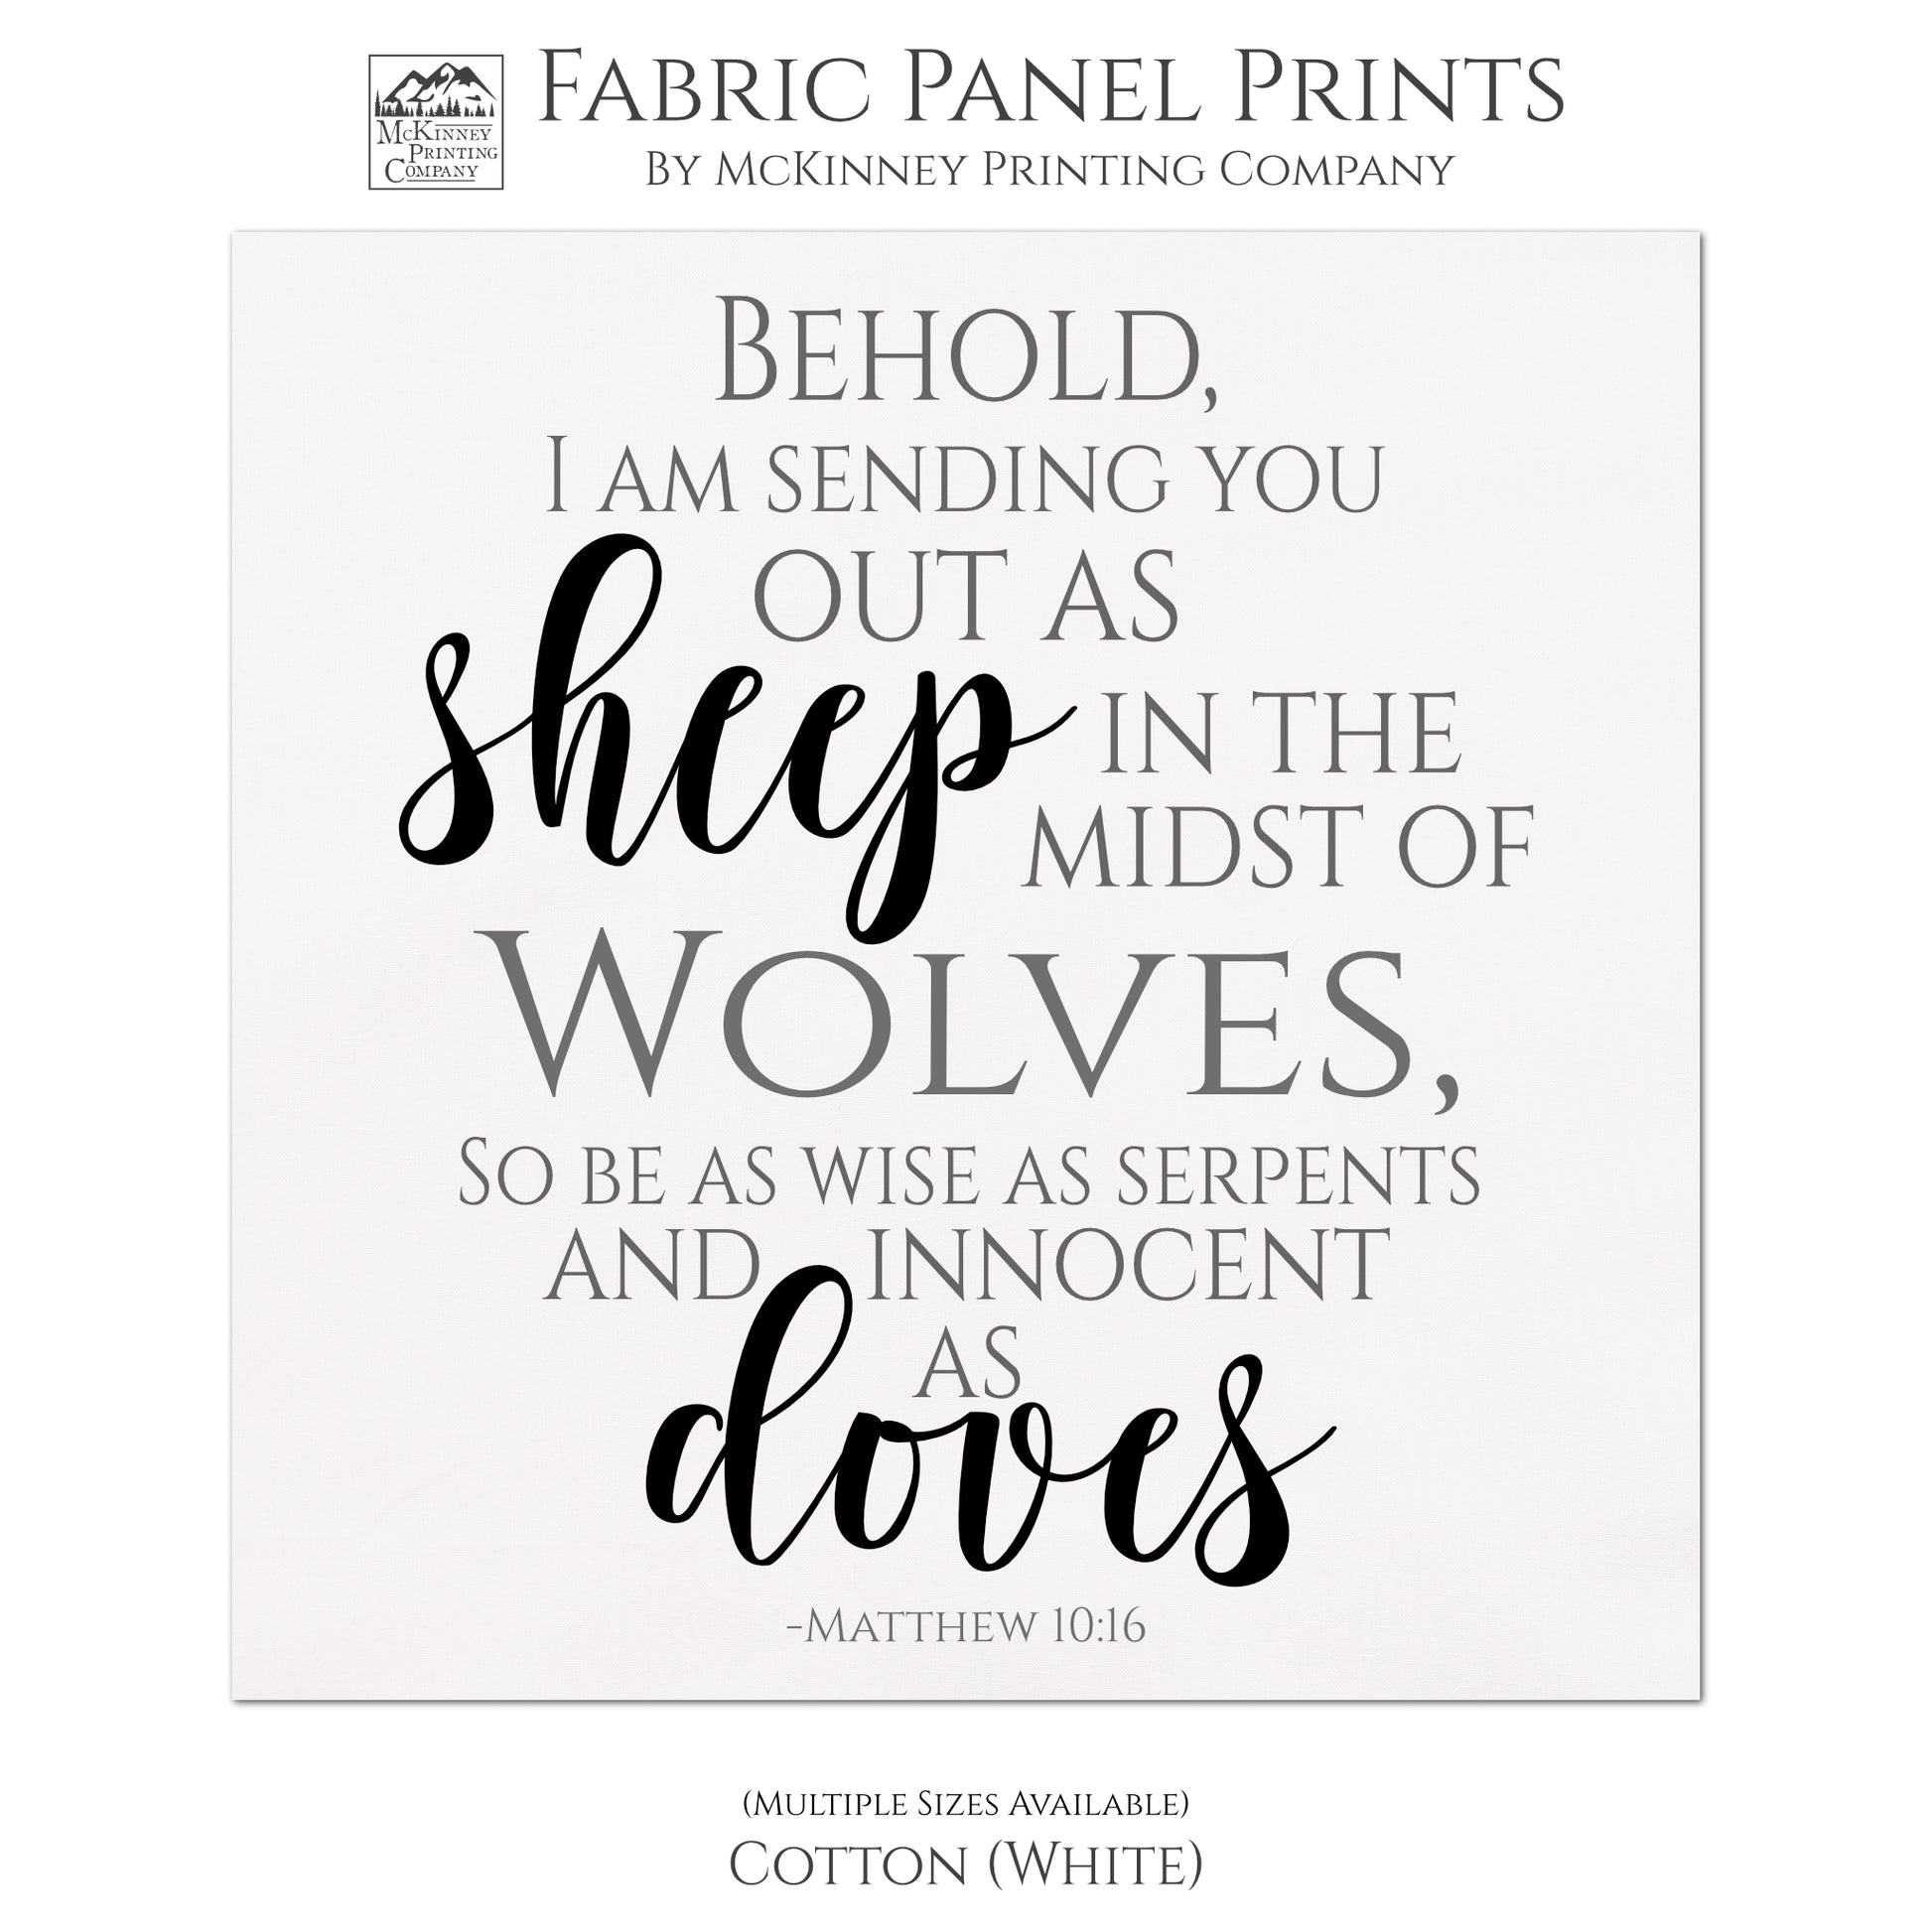 Behold, I am sending you out as sheep in the midst of wolves, so be as wise as serpents and innocent as doves. - Matthew 10 16, Bible Verse Wall Art, Scripture Fabric, Religious Fabric, Quilt Block - Cotton, White